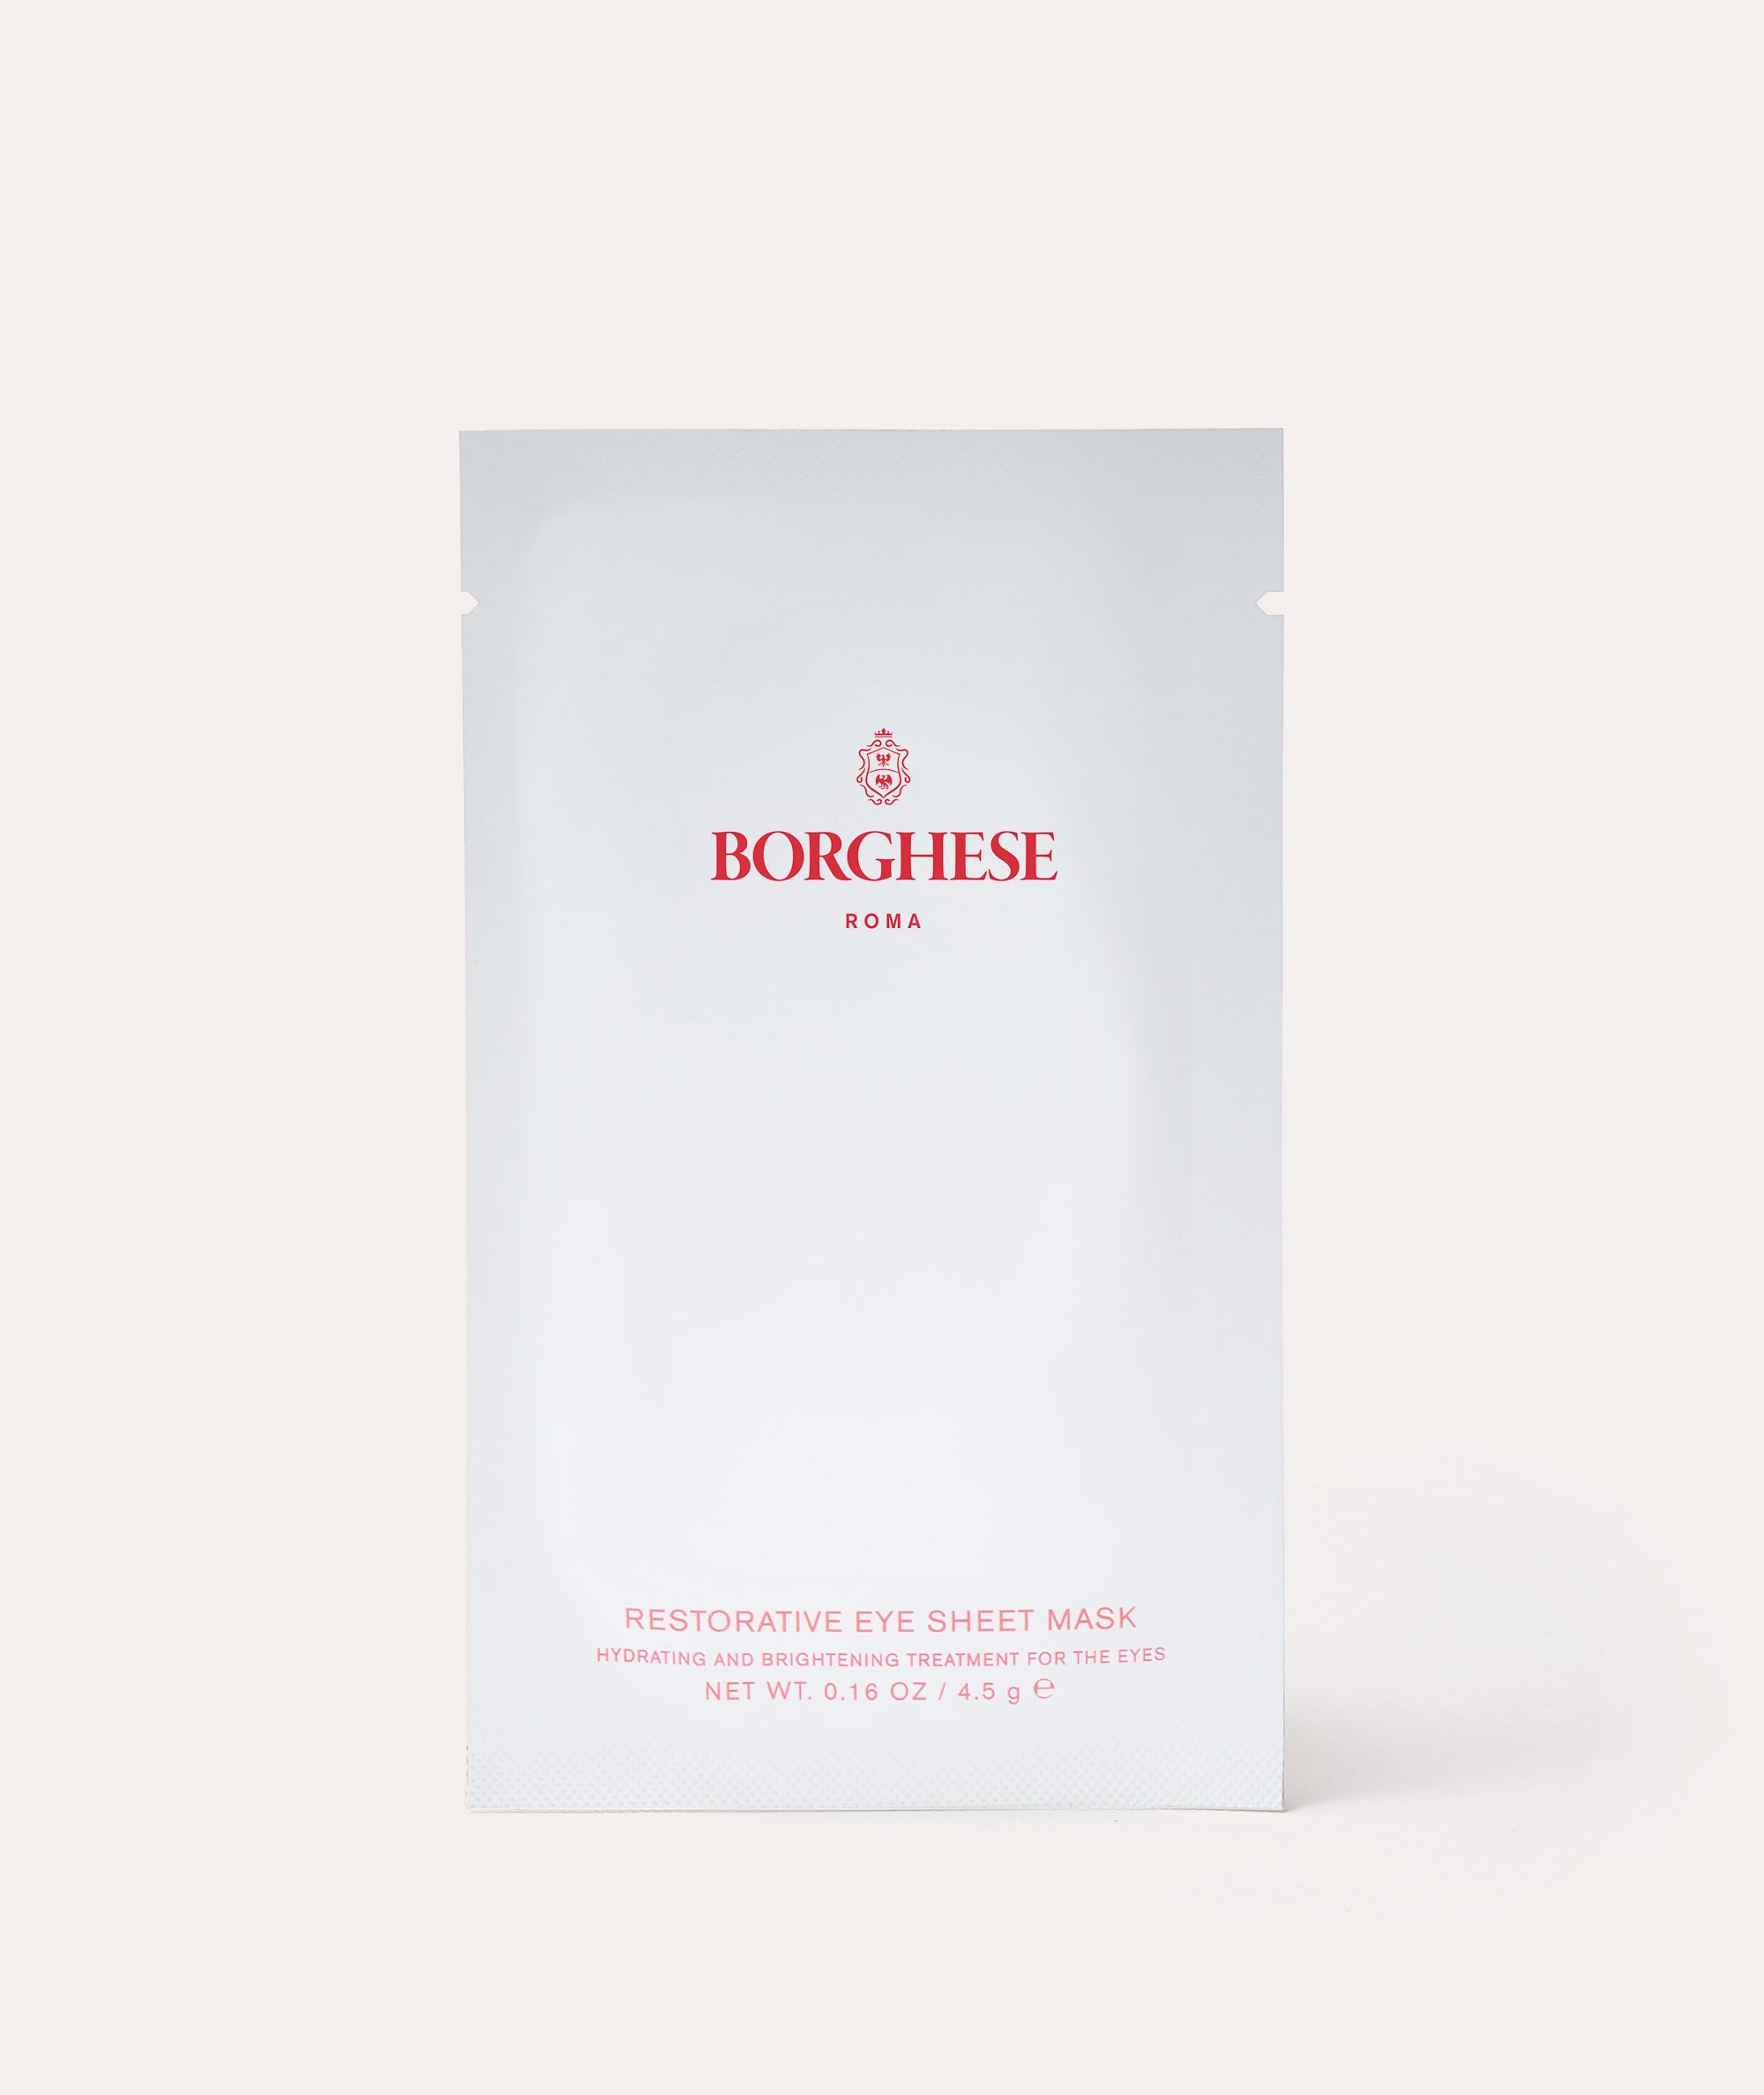 This is a picture of the Borghese Restorative Eye Sheet Mask packette